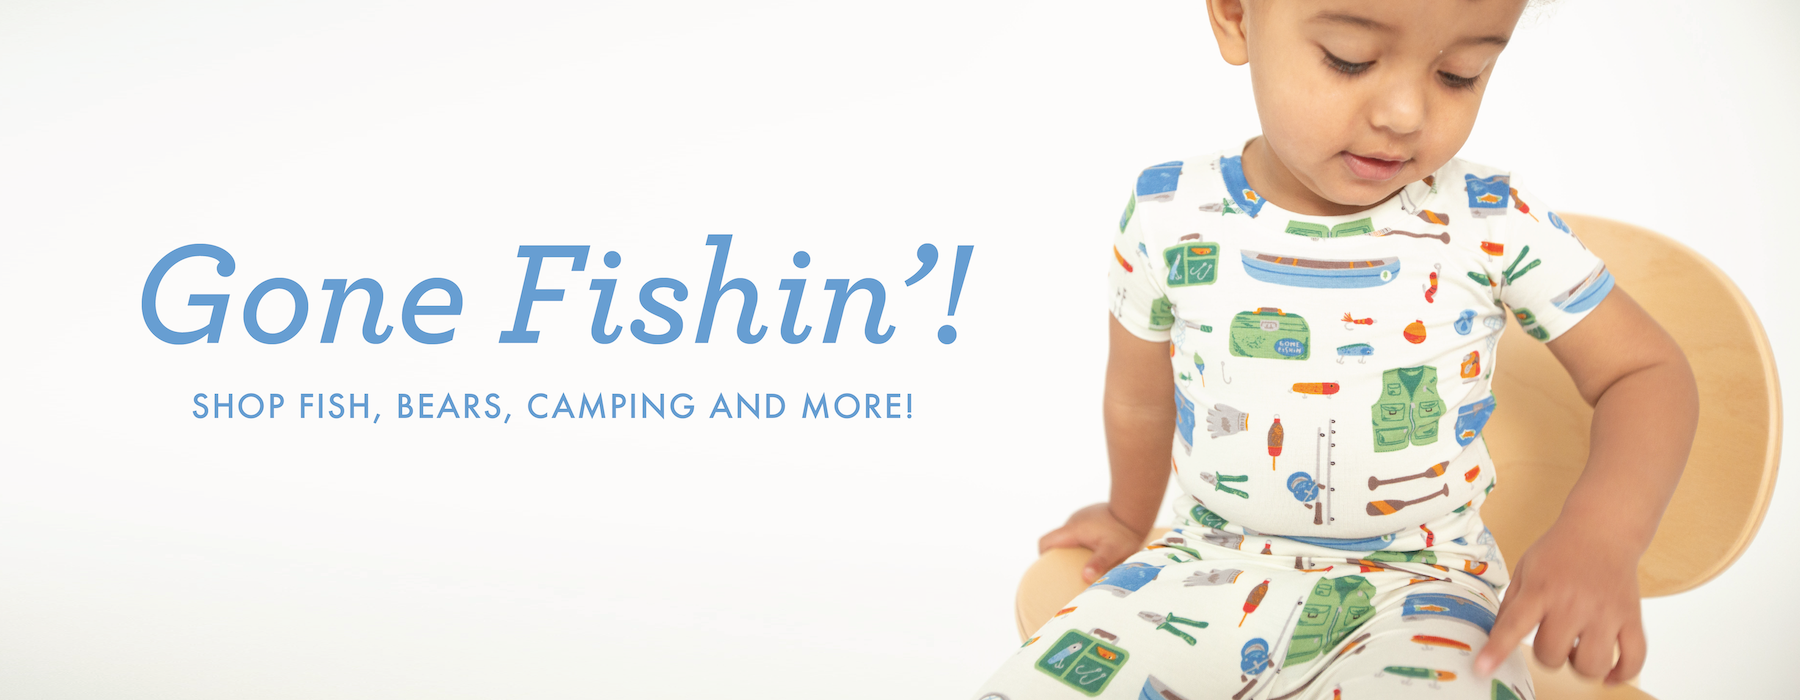 Toddler boy points to fishing tools print on pajamas. Text says Gone Fishin' Shop fish, bears, camping and more!